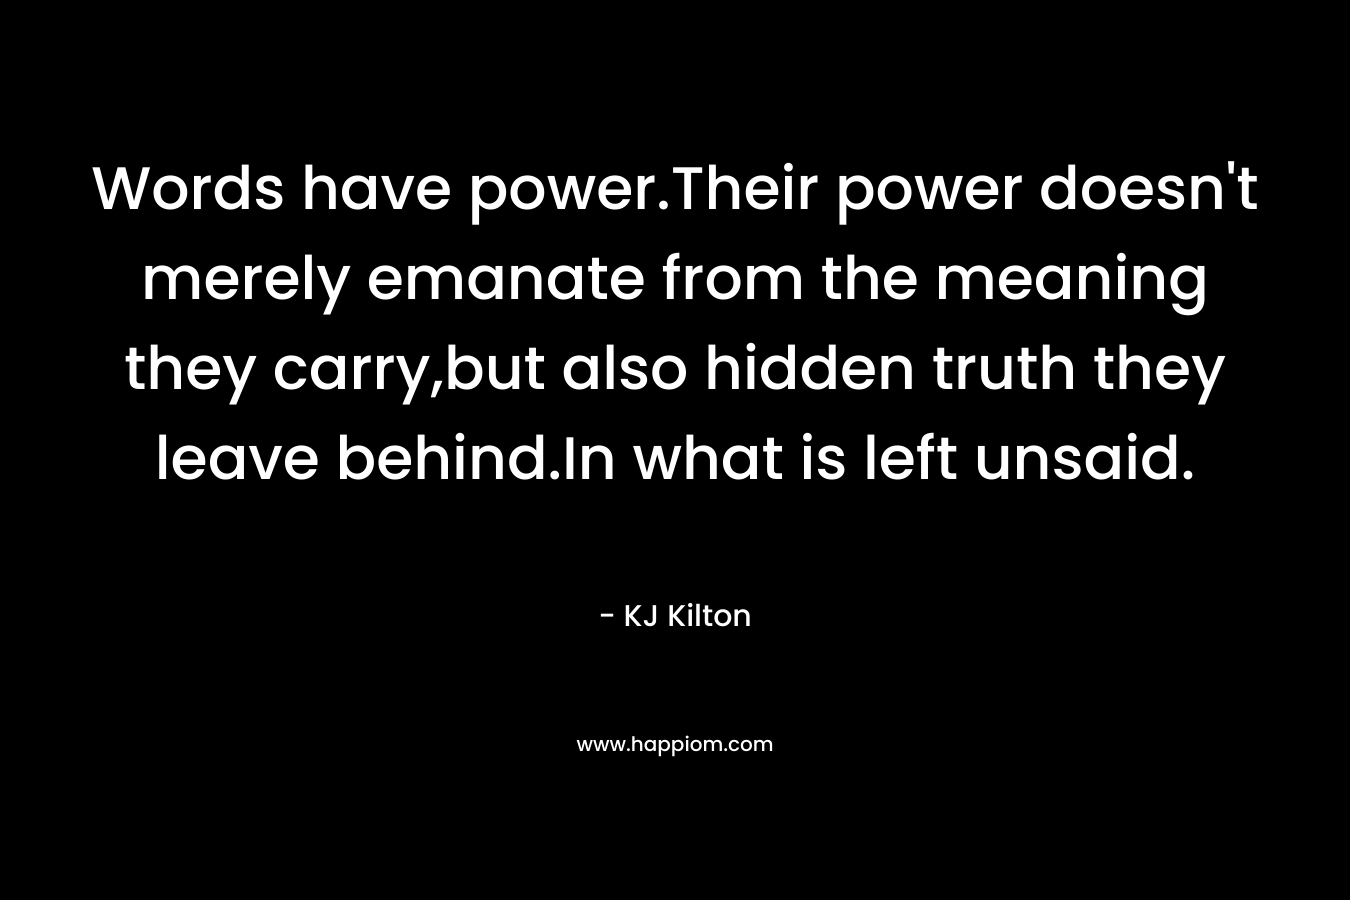 Words have power.Their power doesn’t merely emanate from the meaning they carry,but also hidden truth they leave behind.In what is left unsaid. – KJ Kilton